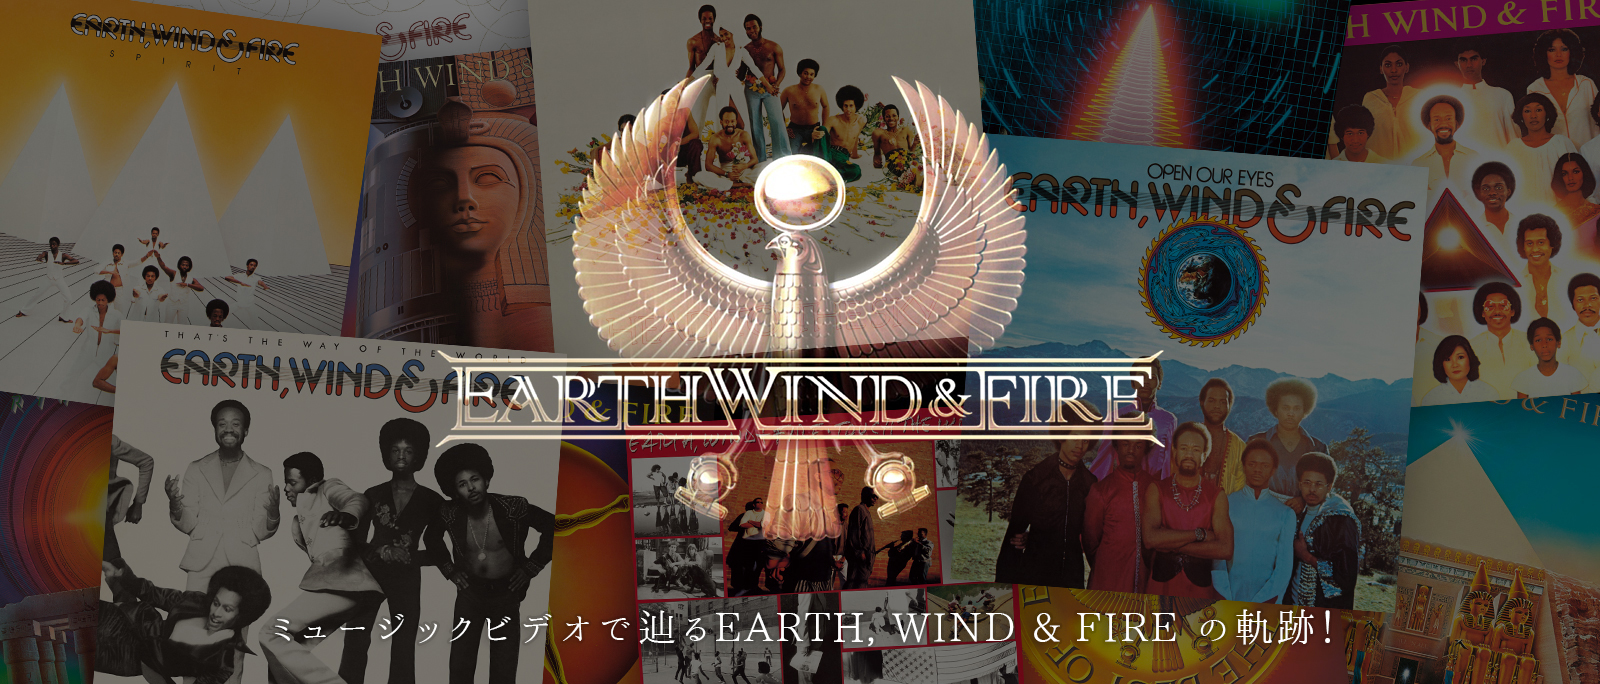 EARTH WIND  FIRE | UPCOMING ARTIST | CREATIVEMAN PRODUCTIONS